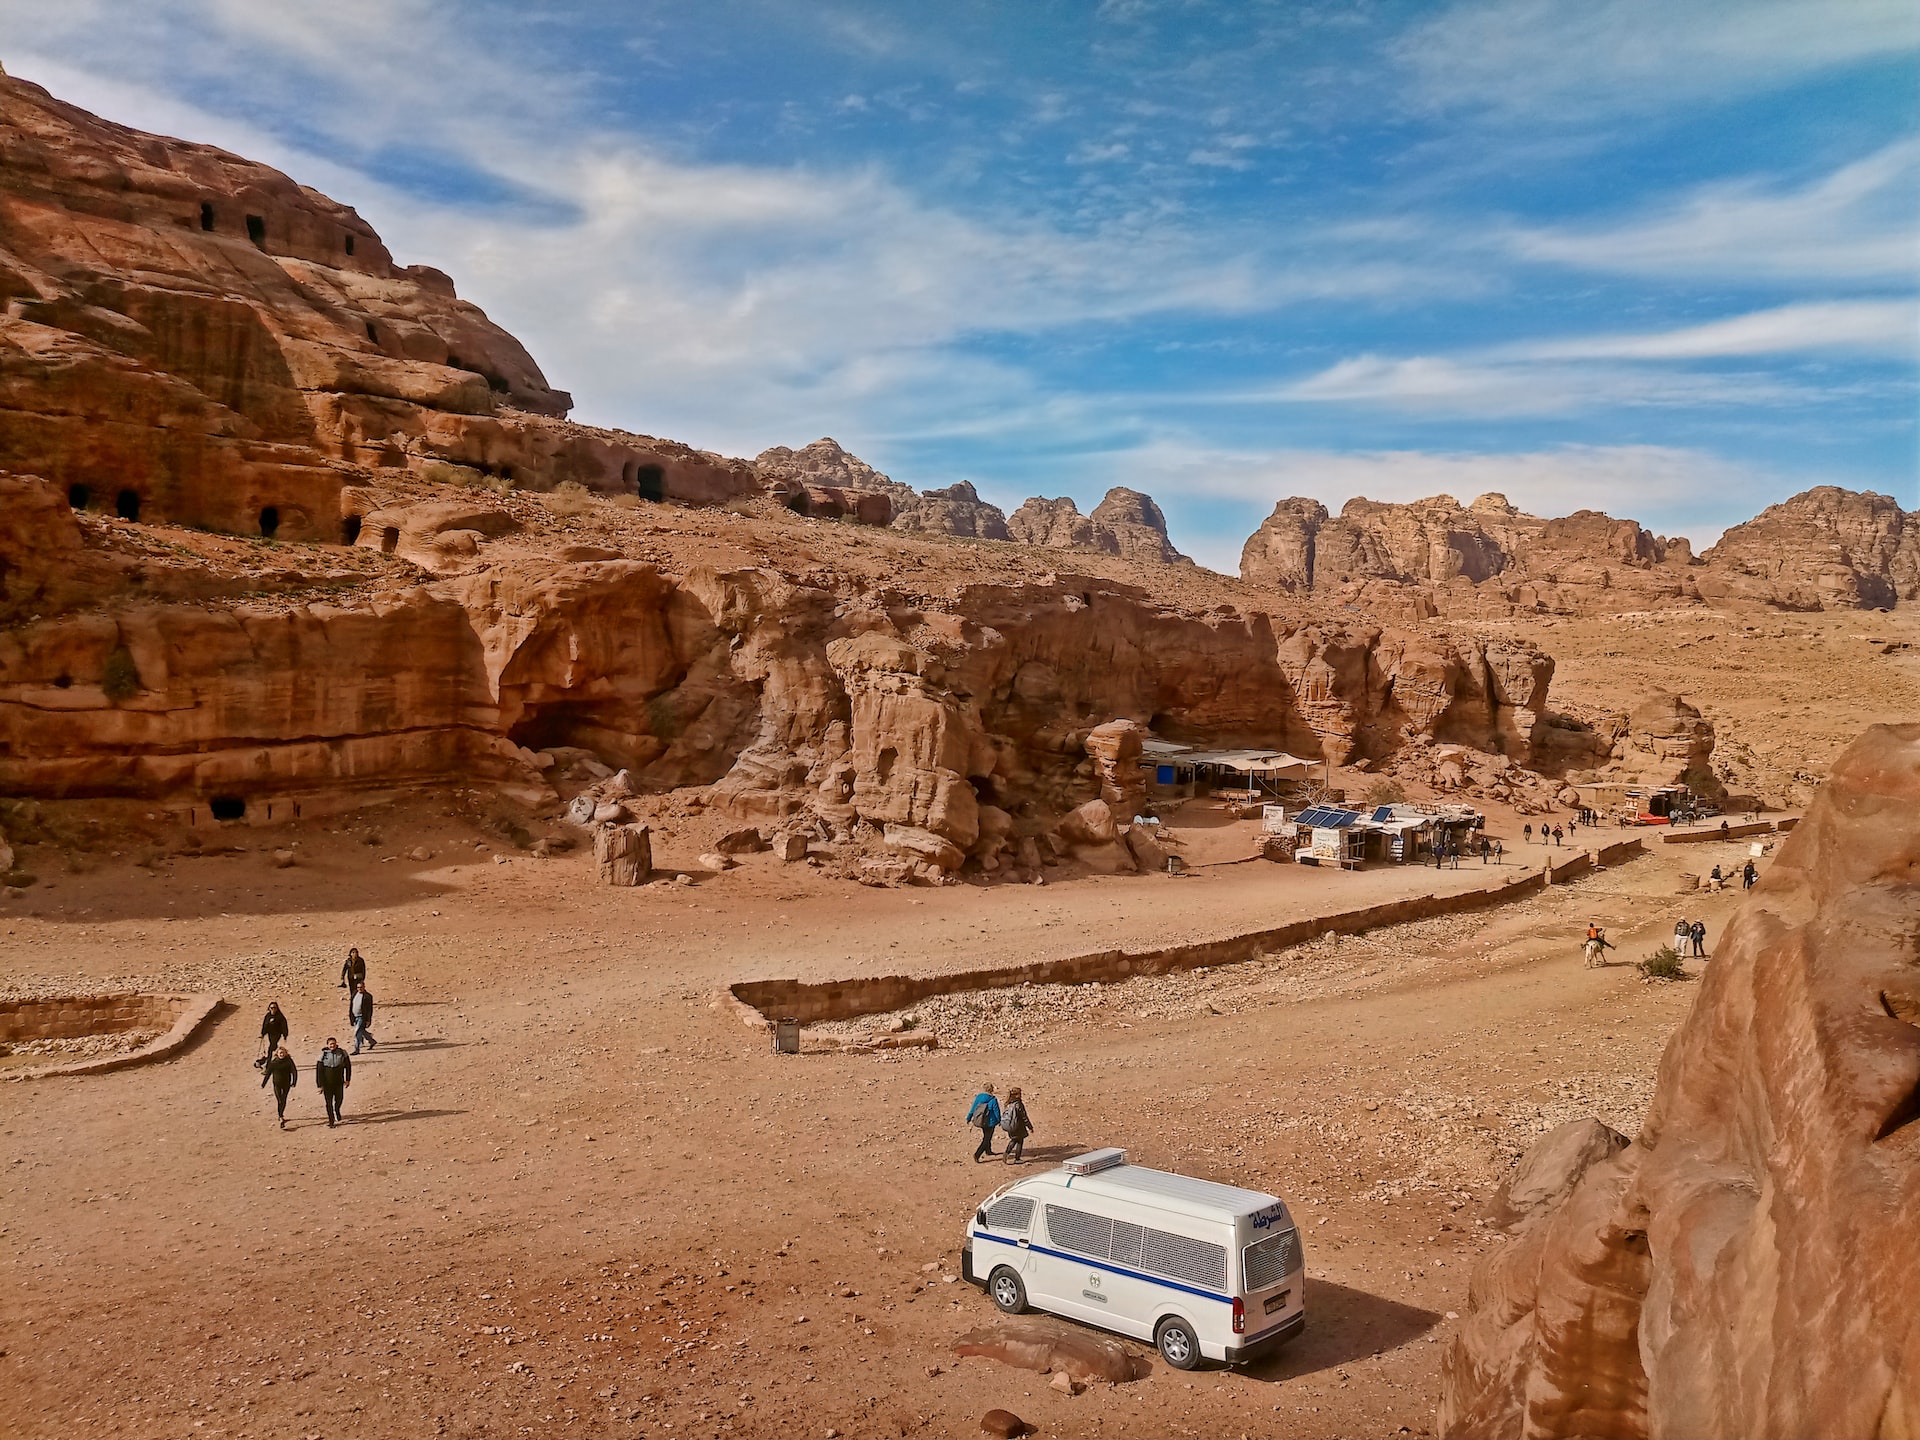 How to Get from Petra to Wadi Rum- Private Transfer from Petra to Wadi Rum